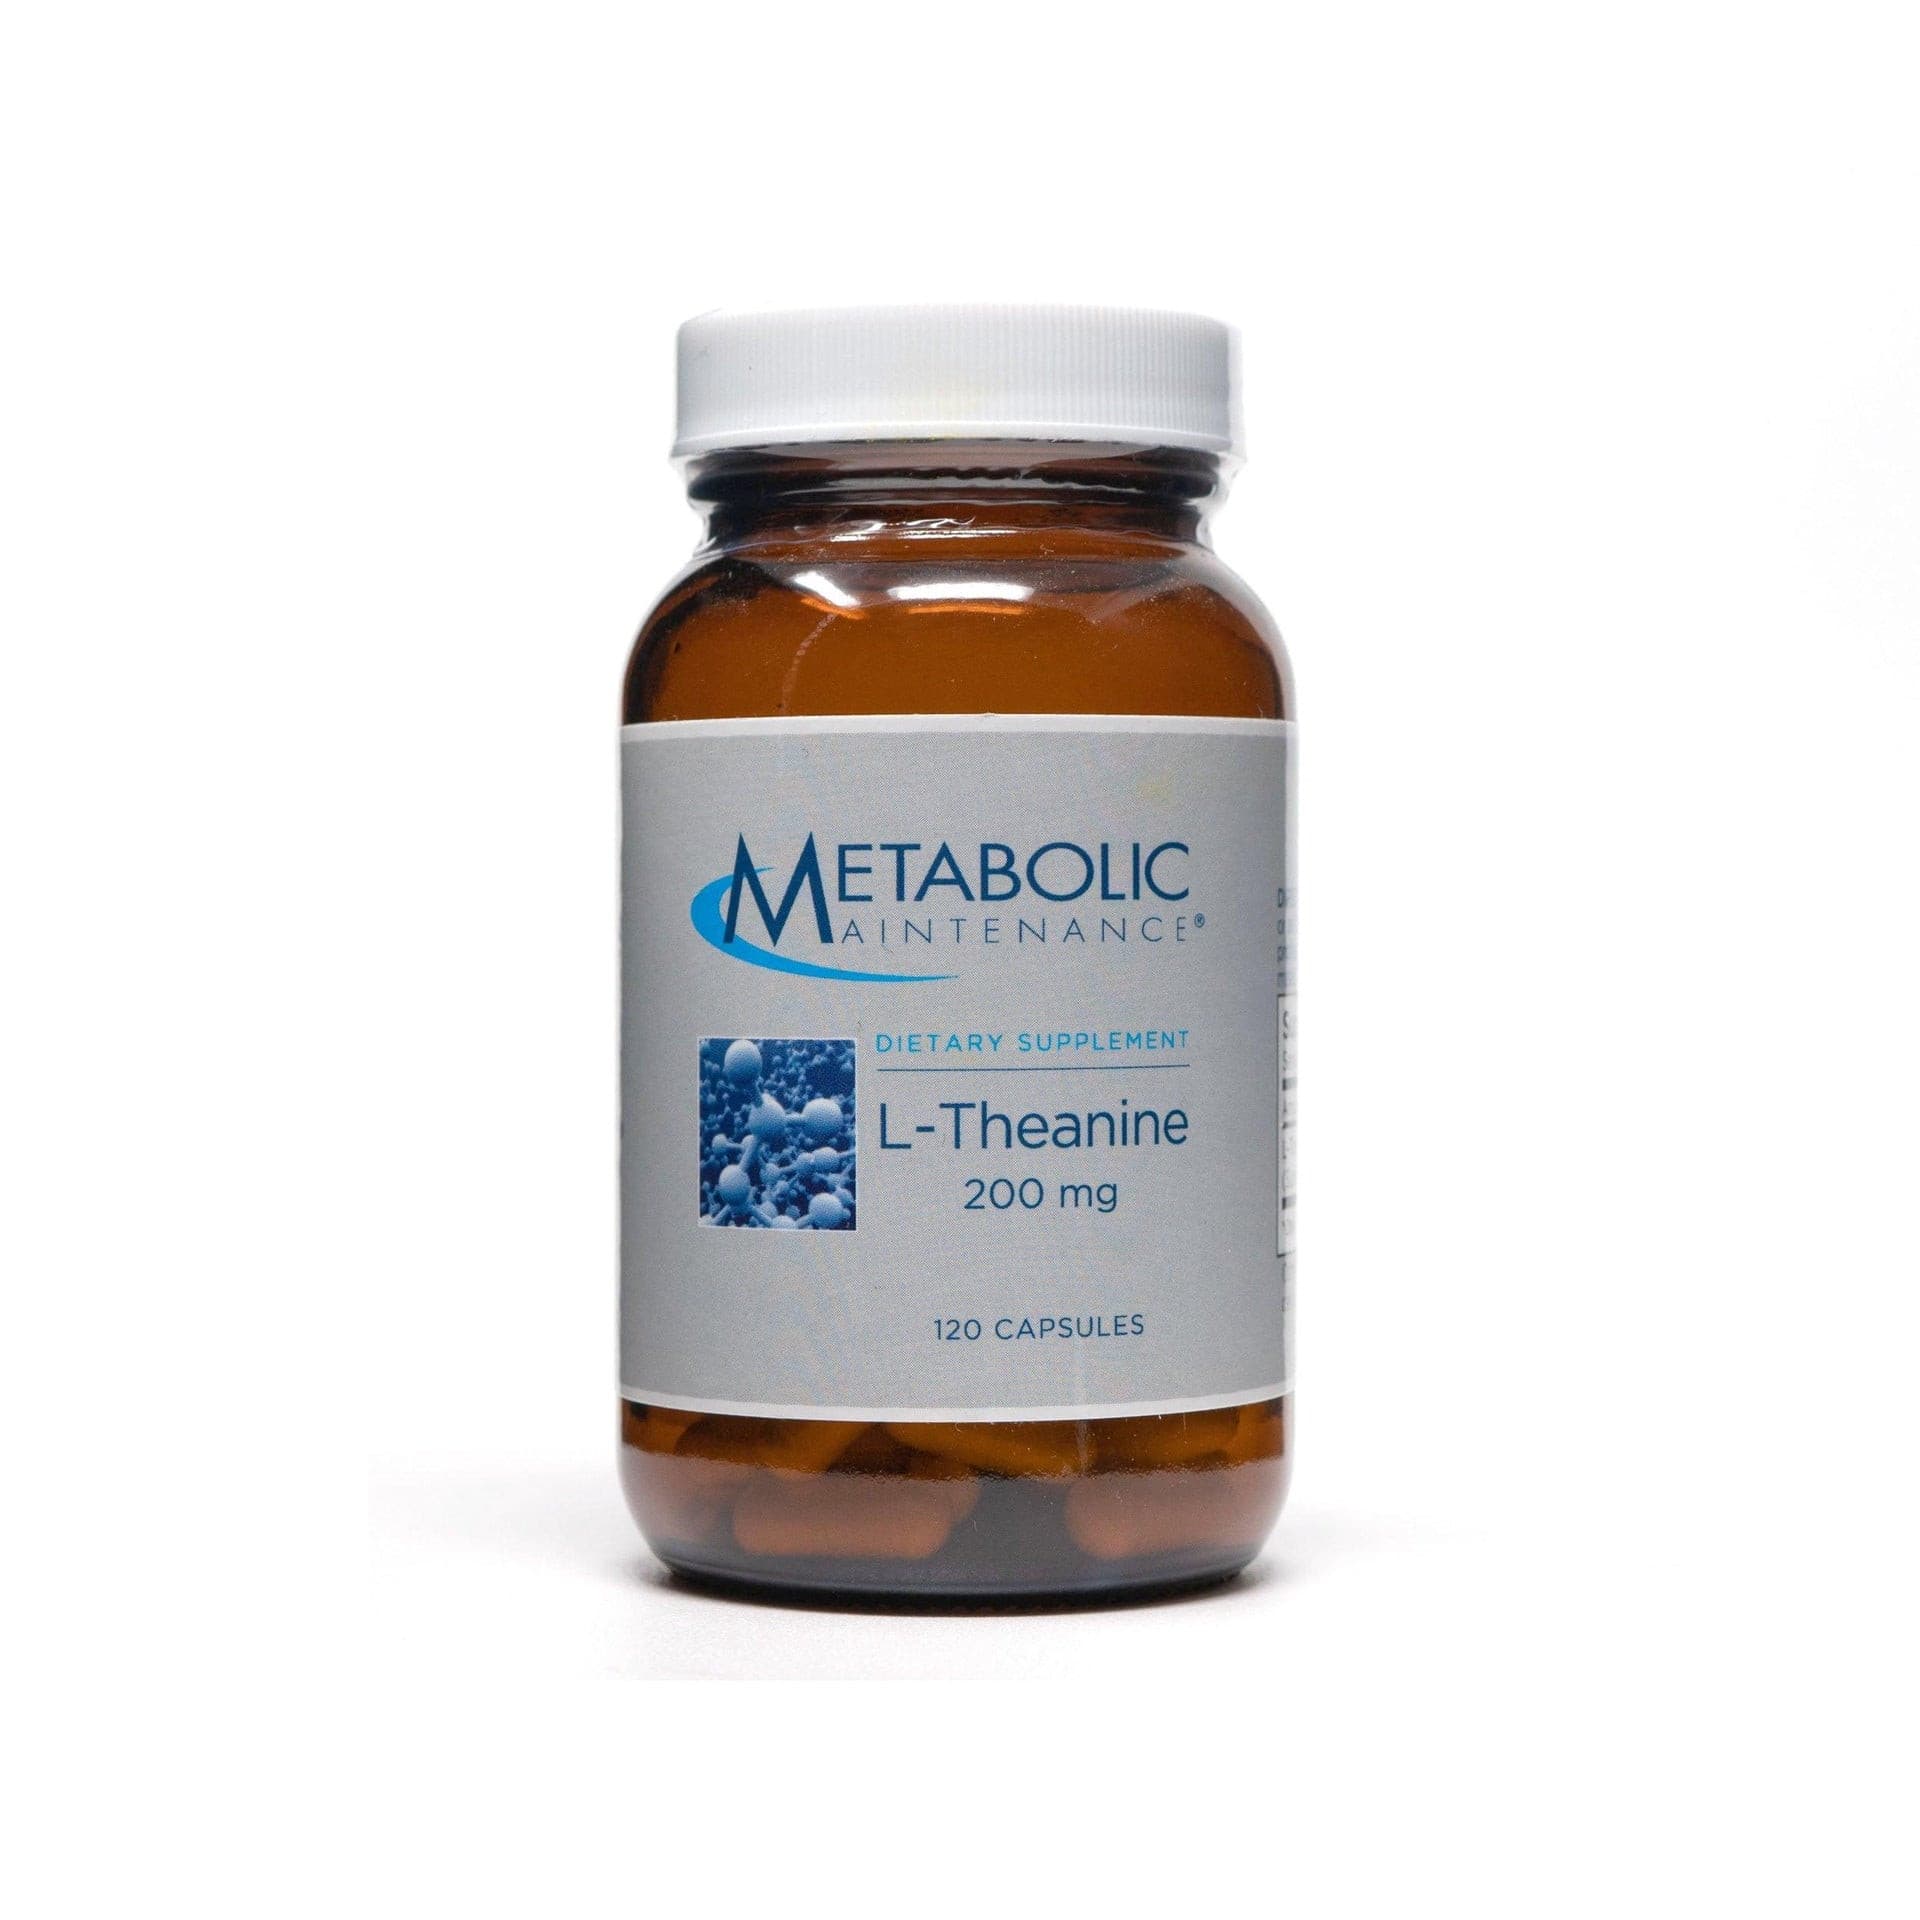 L-Theanine 200mg 120 Capsules.